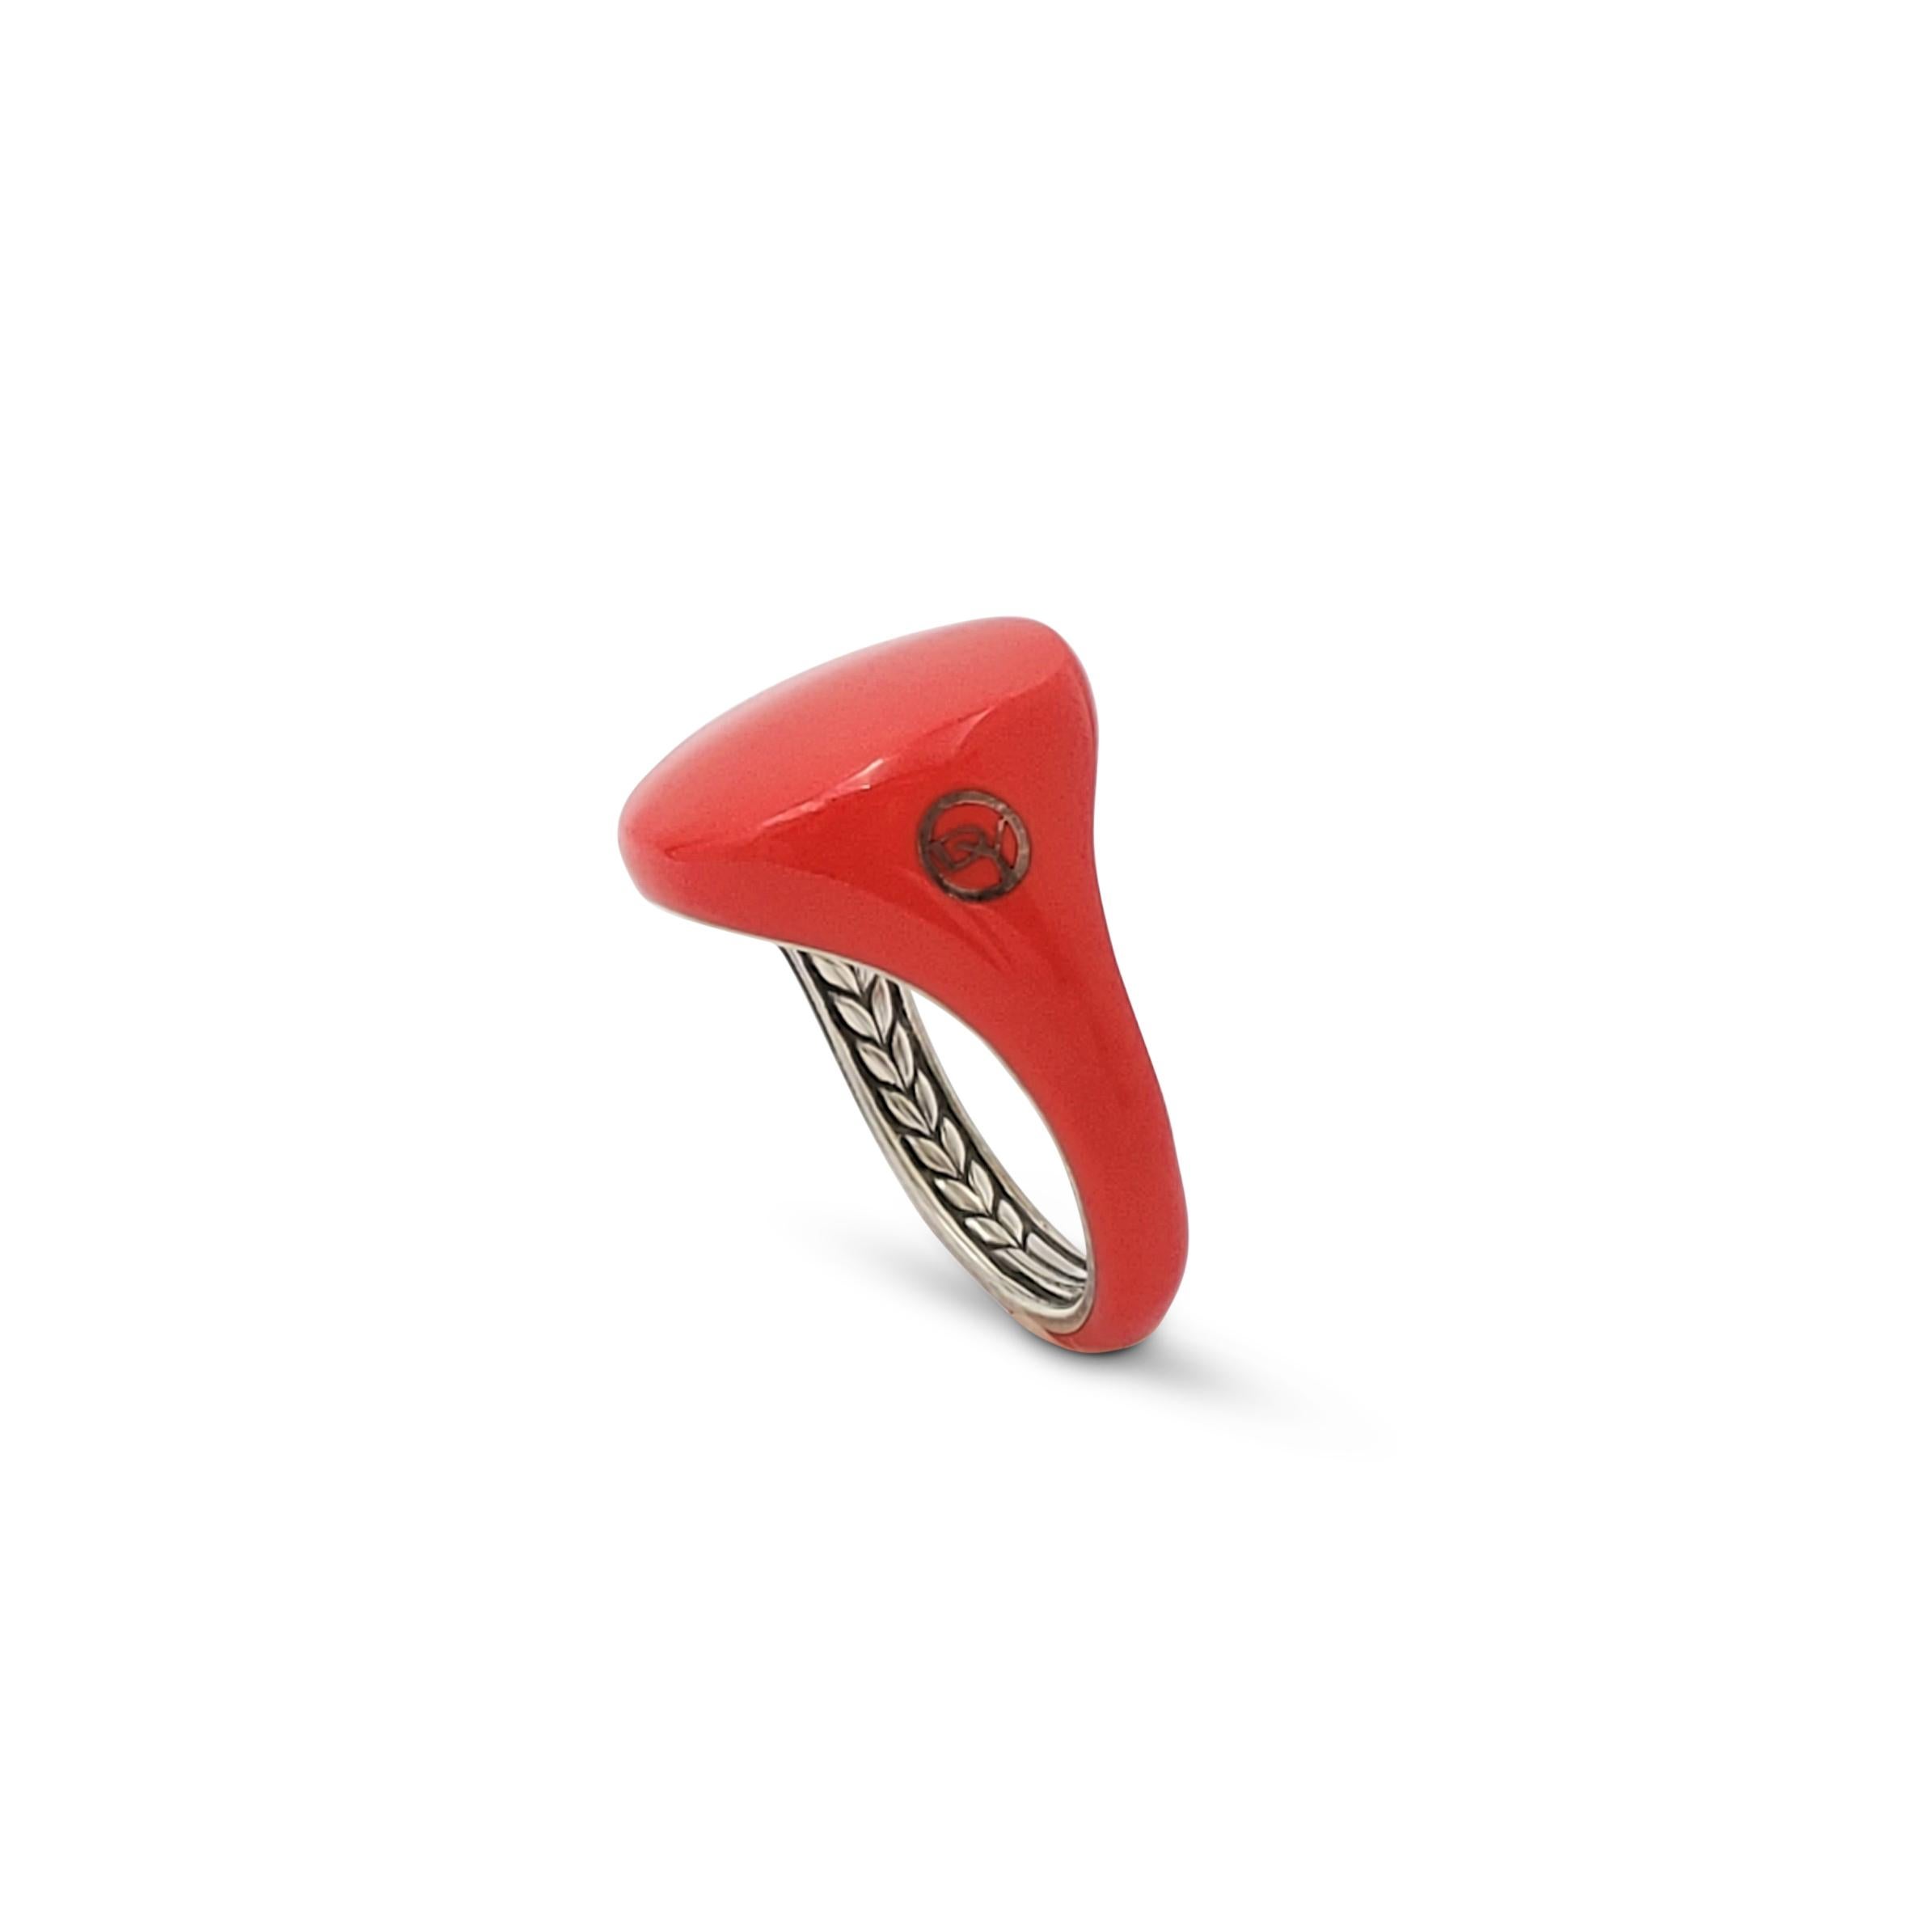 Authentic David Yurman pinky ring from the 'Cable Collectibles' collection is crafted in silver and coated in vibrant candy apple red-colored ceramic. Signed DY, 925. Ring size 5. The ring is presented with the original pouch, no box or papers.